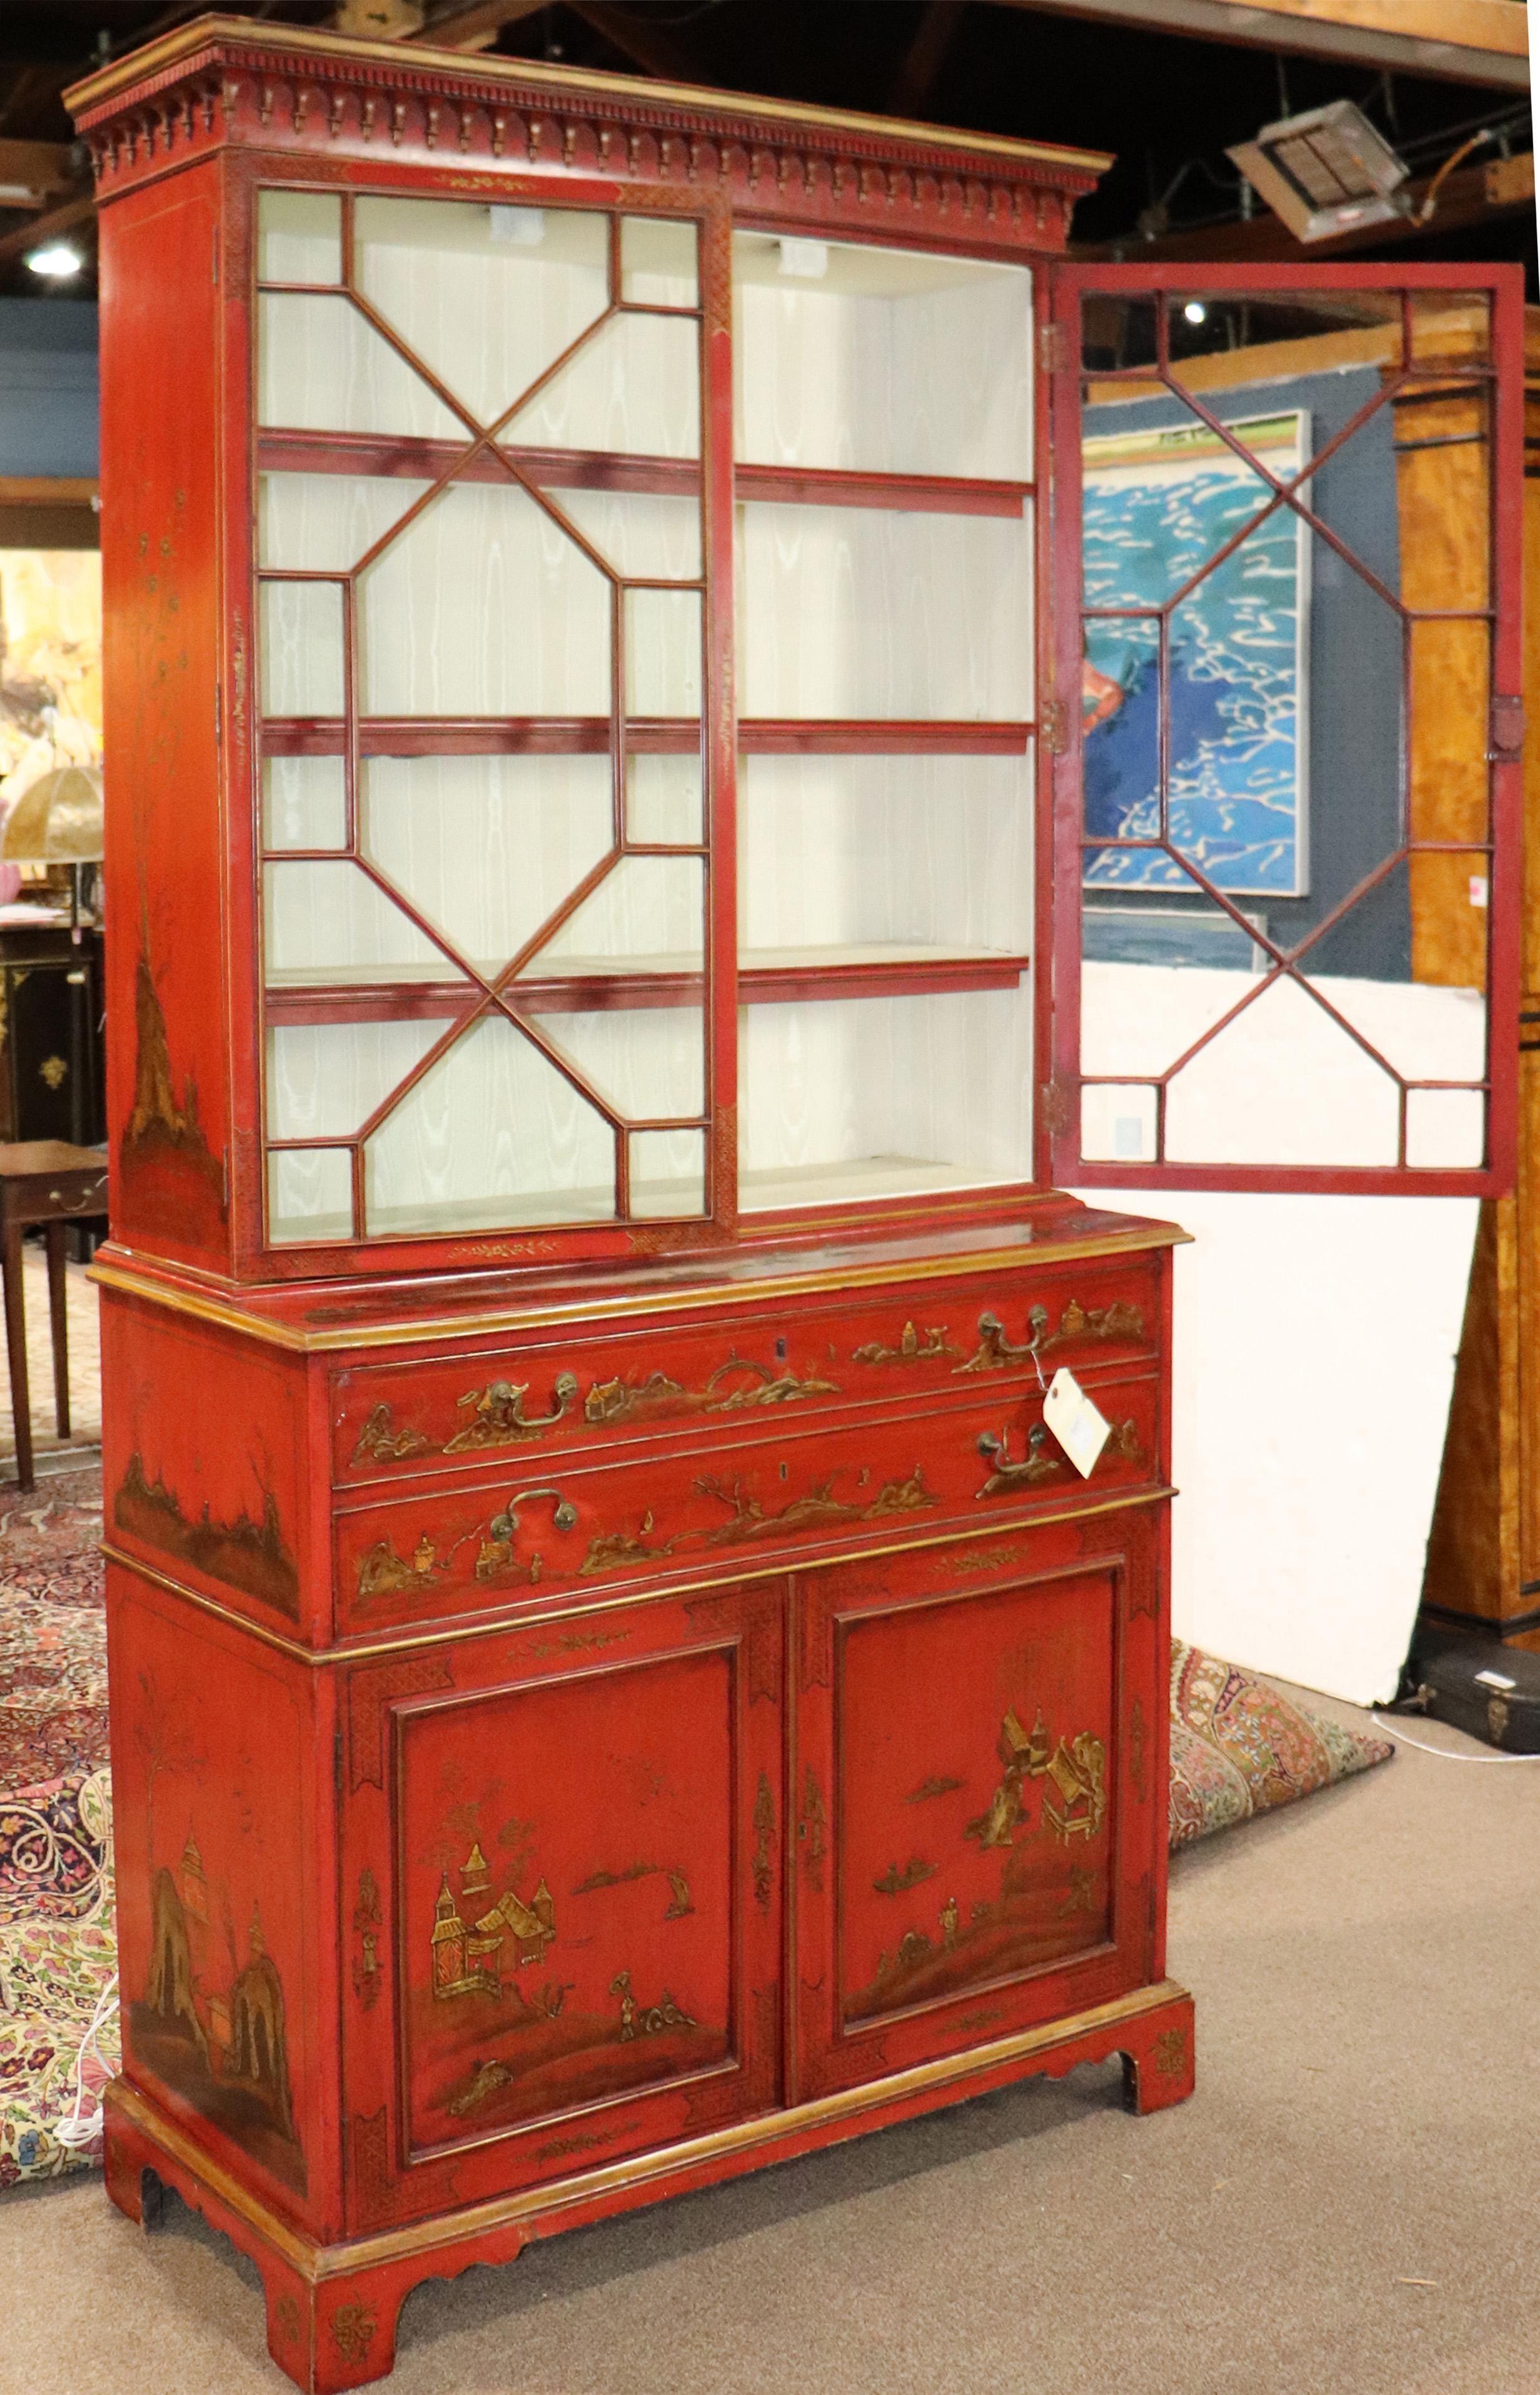 An English George III polychrome decorated secretary executed in the Chinoiserie taste, late 18th century, the superstructure with mullioned doors opening to fixed shelves above the lower case having two drawers over two doors and rising on bracket